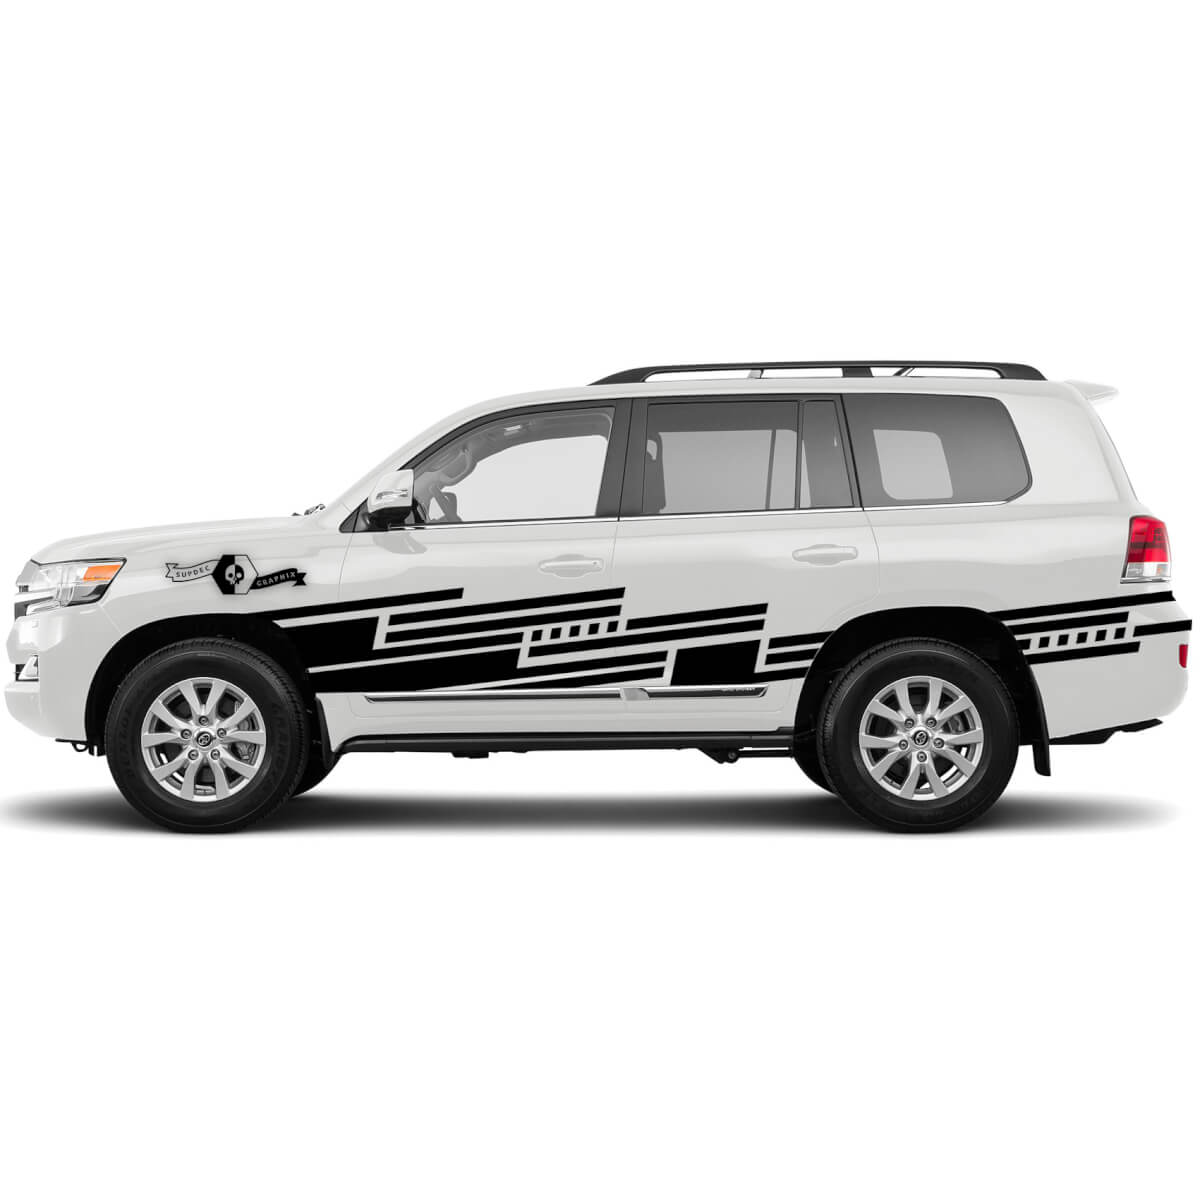 Stripes Lines Wrap Racing Decal Sticker for off road Side Toyota land Cruiser logo J300 J200 2